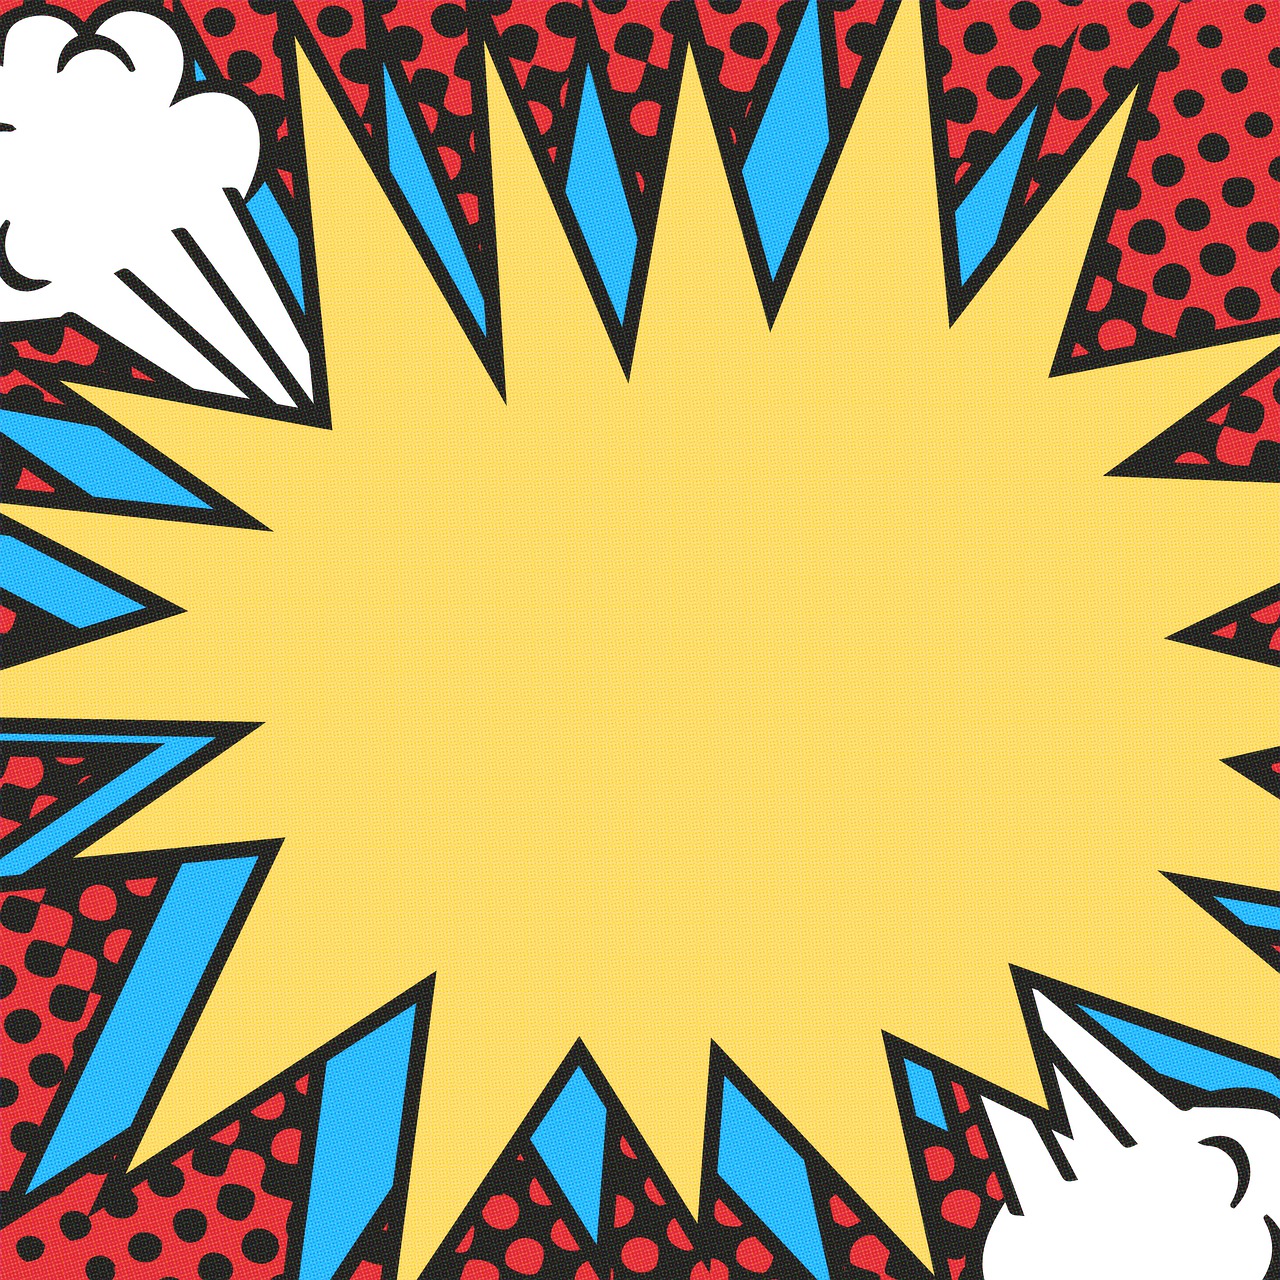 a pop art comic speech bubble on a polka dot background, inspired by Lichtenstein, with an explosion on the back, middle close up composition, one panel, background yellow and blue